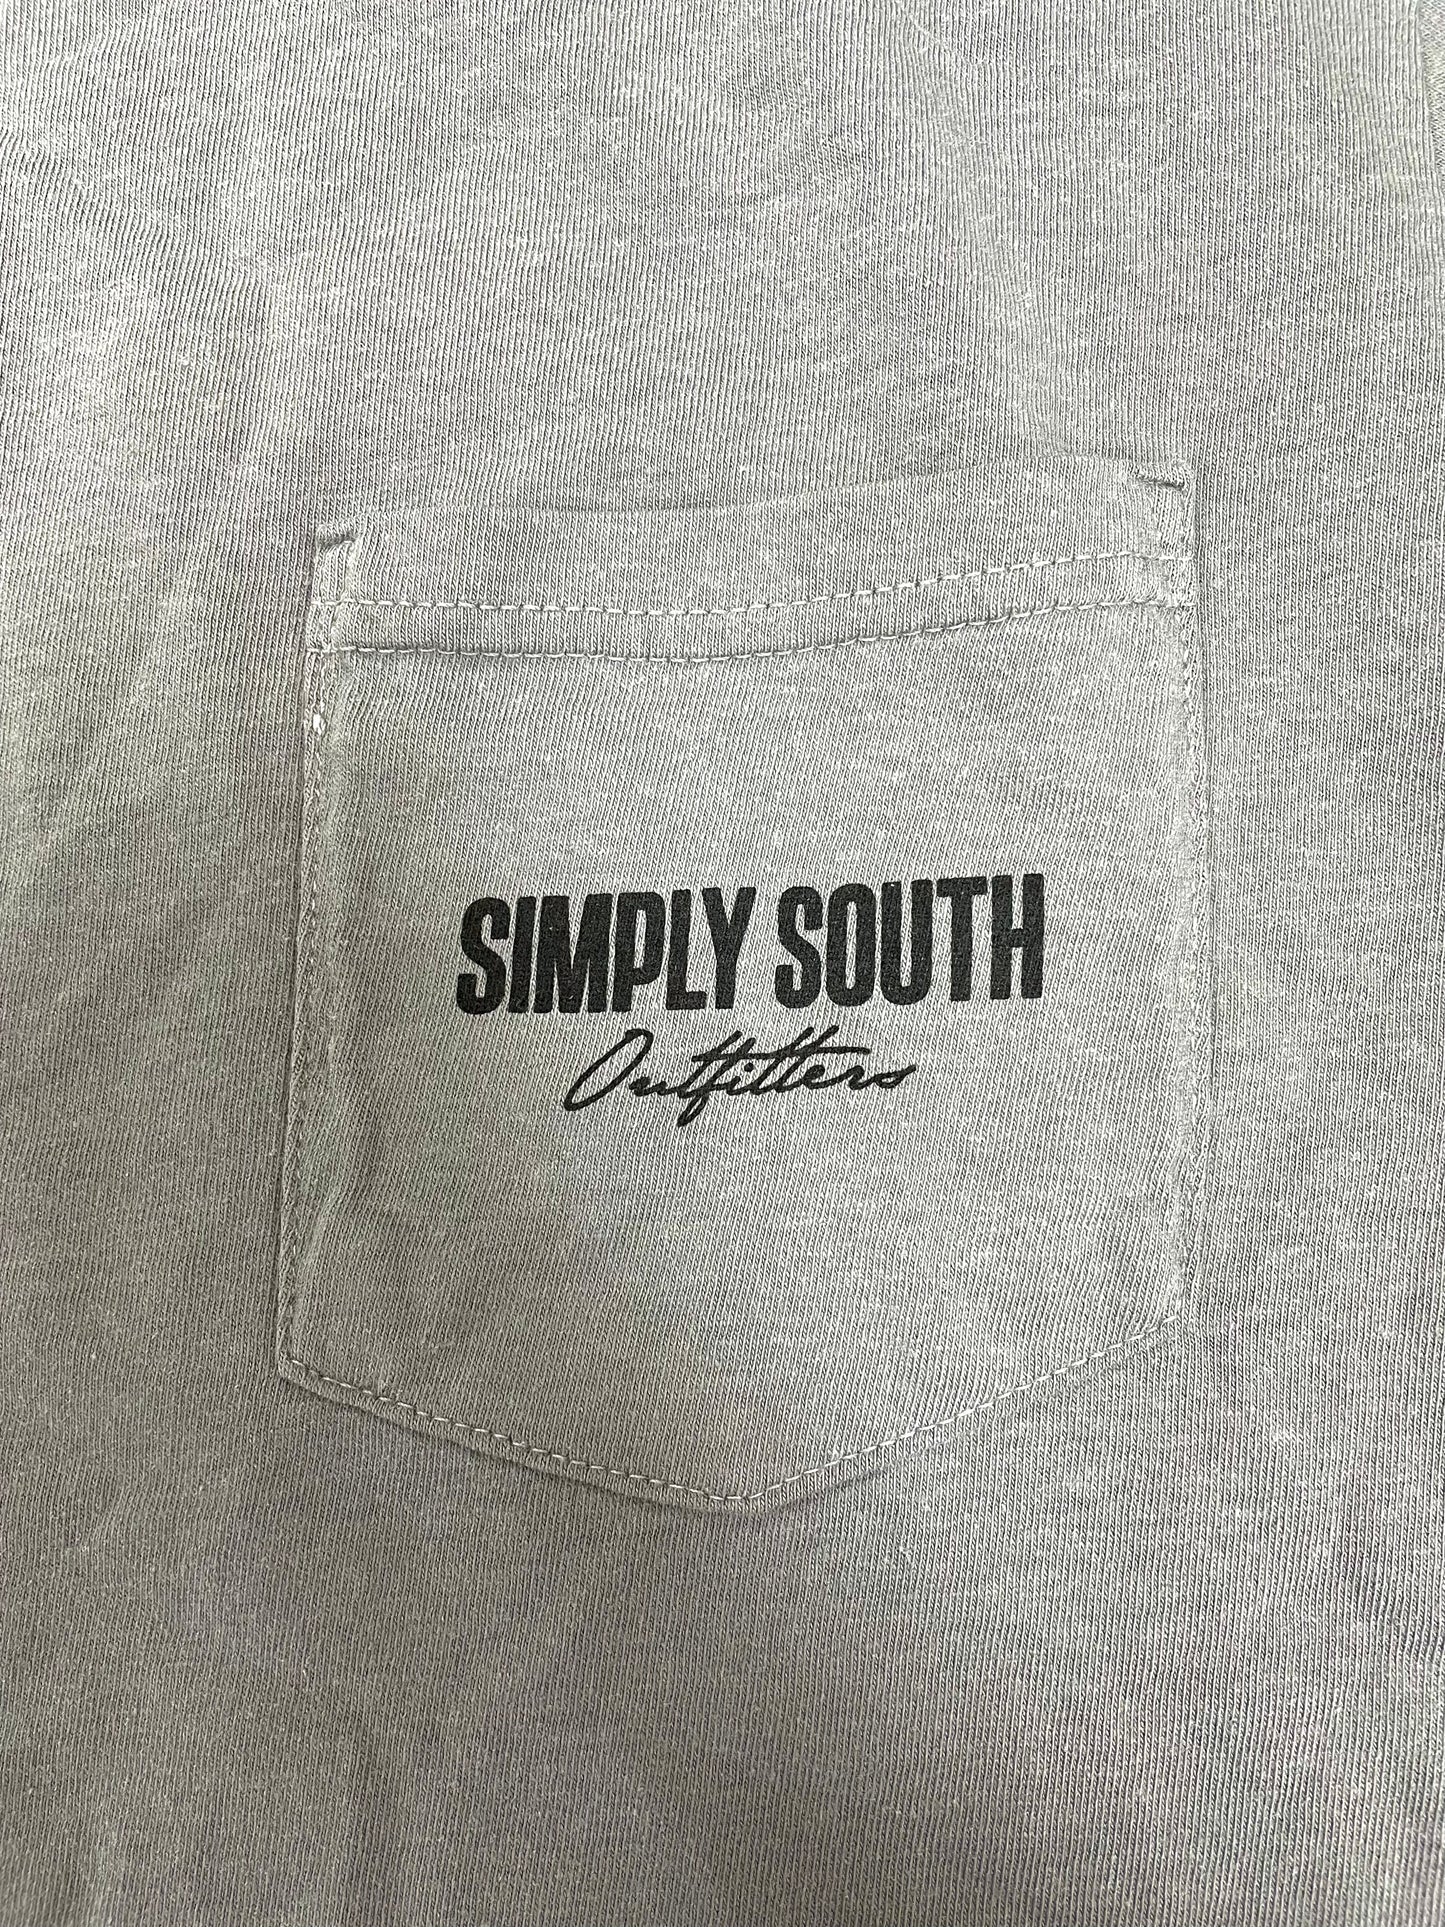 Simply South Outfitters Logo Pocket Tee